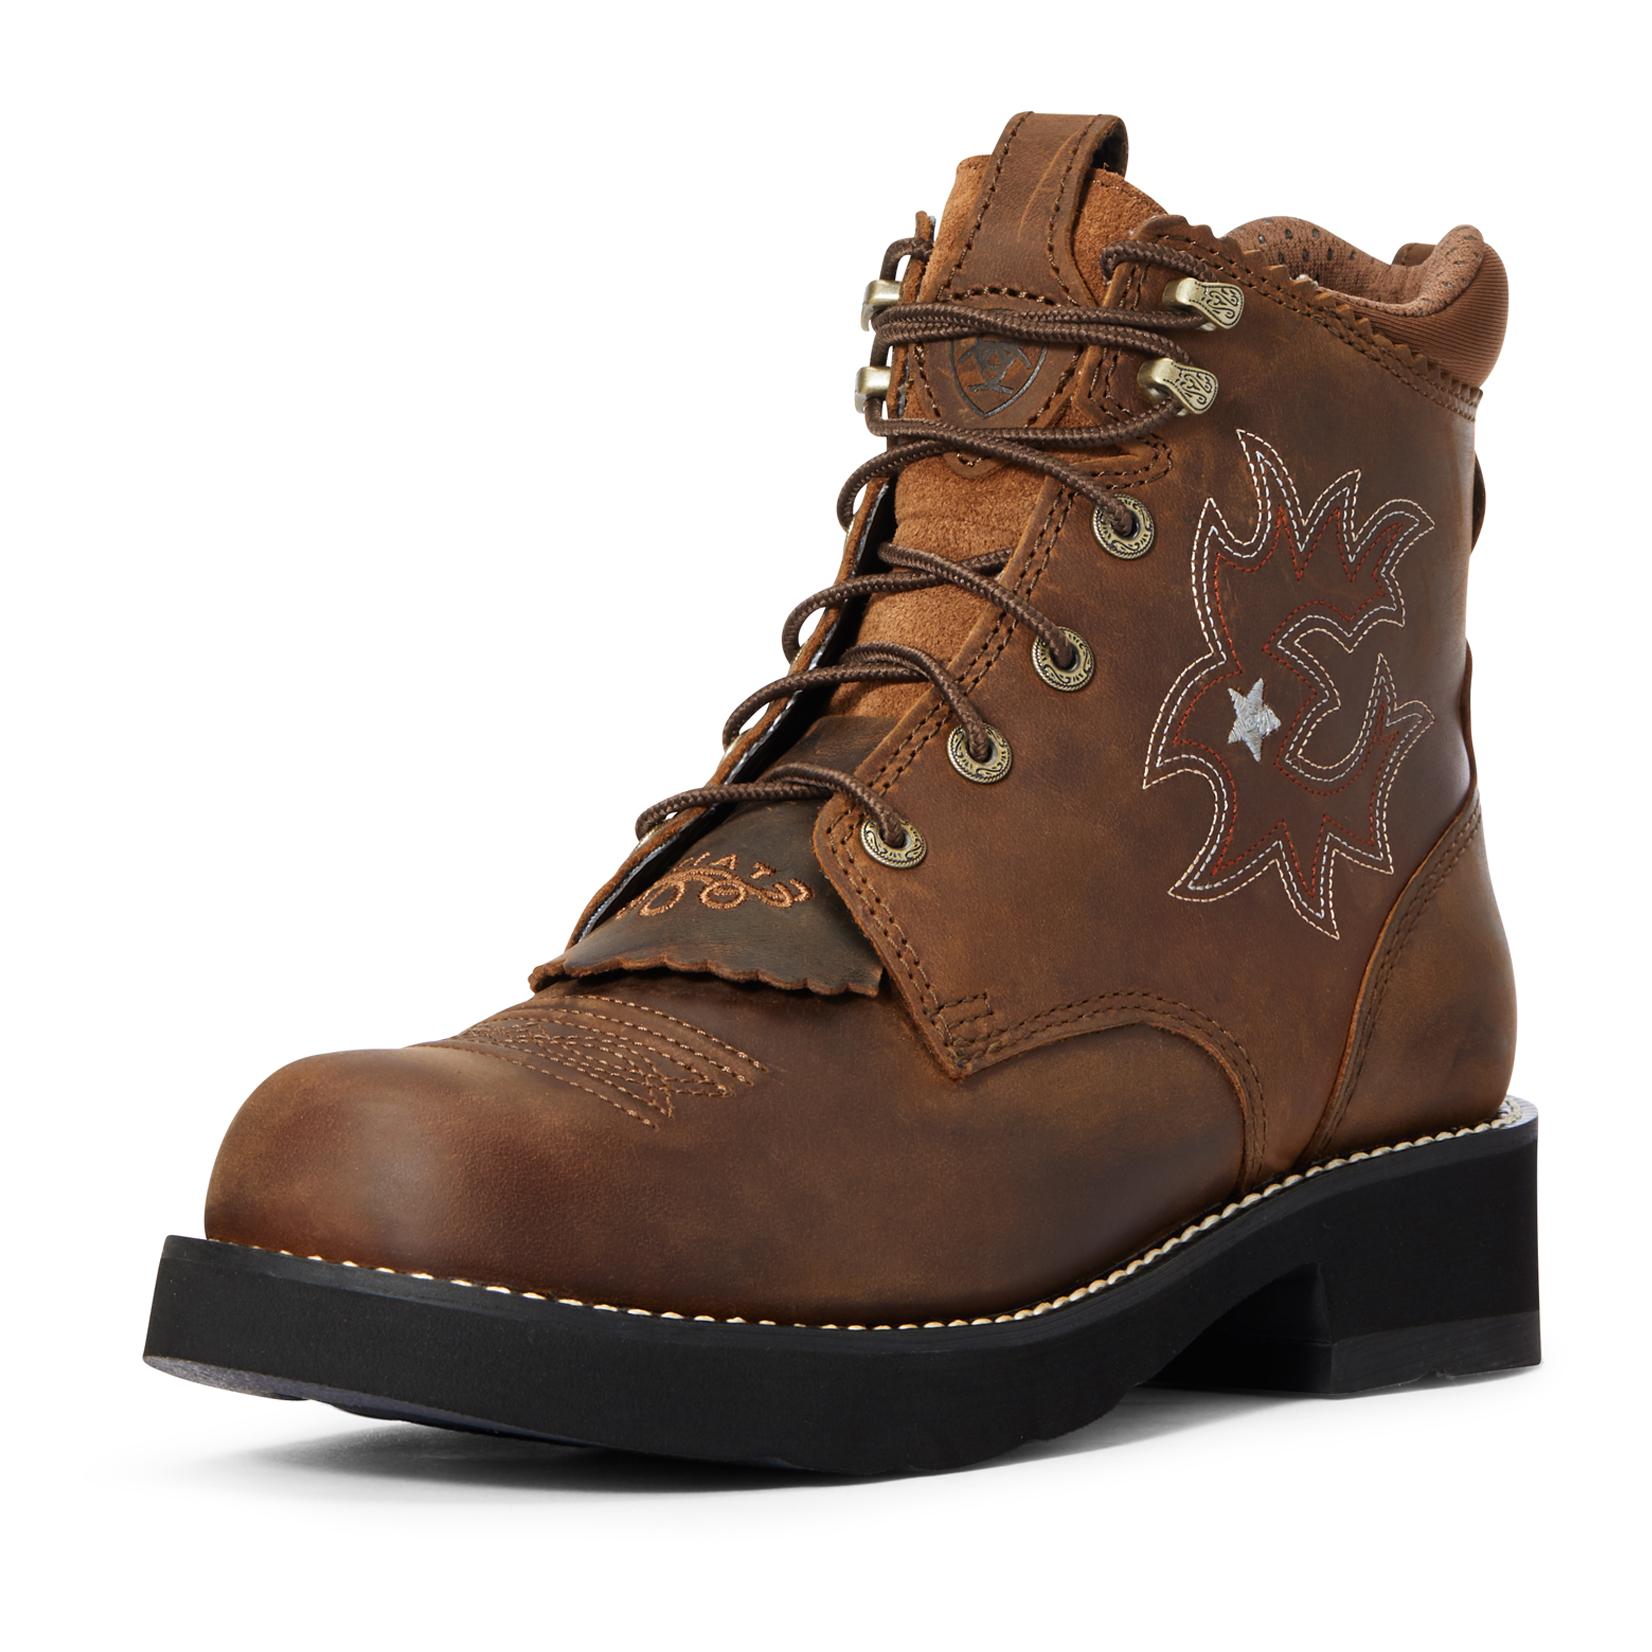 Image of Ariat Westernschuh Women's Probaby Lacer - Driftwood Brown bei Hauptner.ch